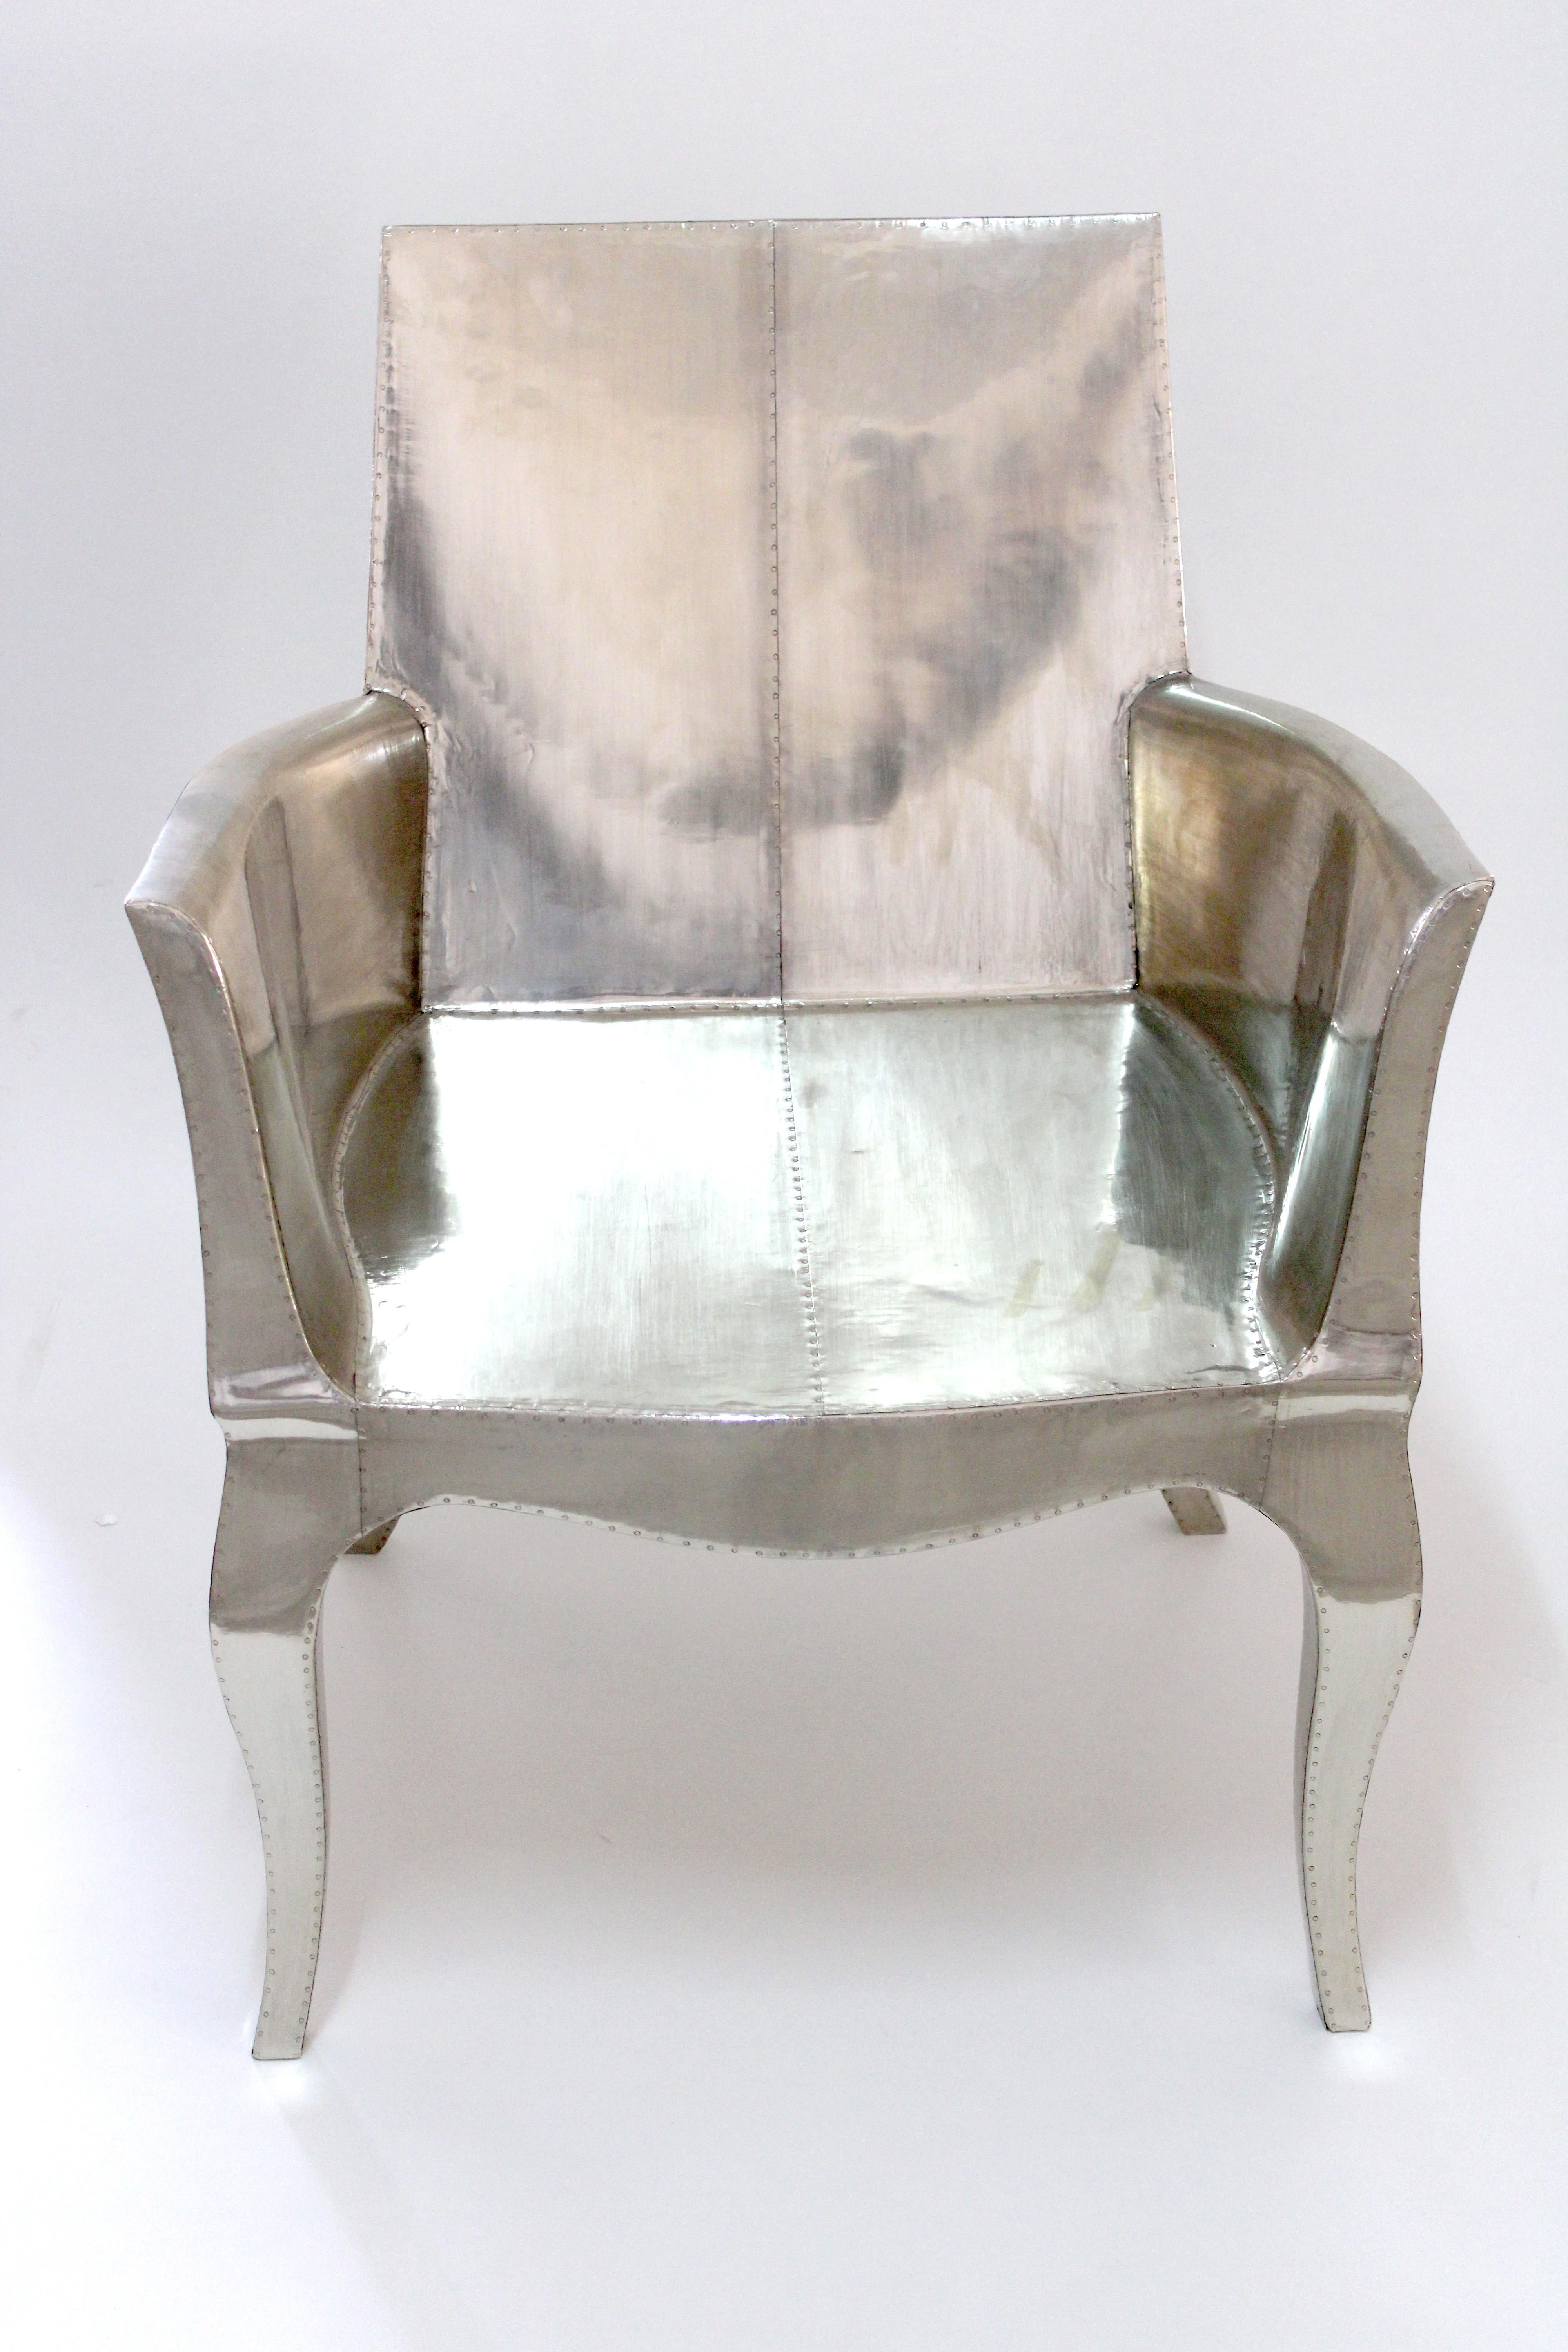 Sheet Metal Antique Art Deco Chairs Smooth White Bronze by Paul Mathieu for S. Odegard For Sale